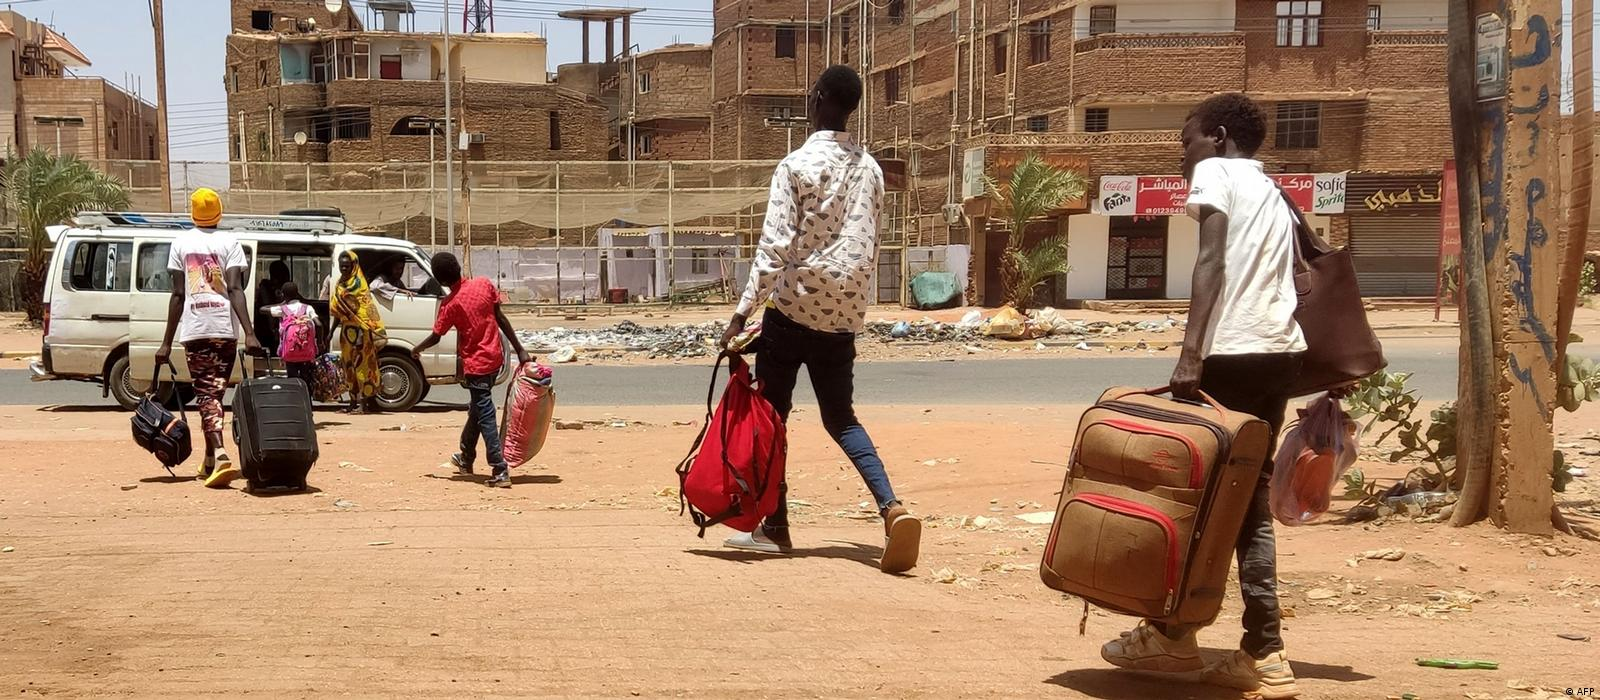 Sudan: Airstrikes in Khartoum as conflict enters 2nd month